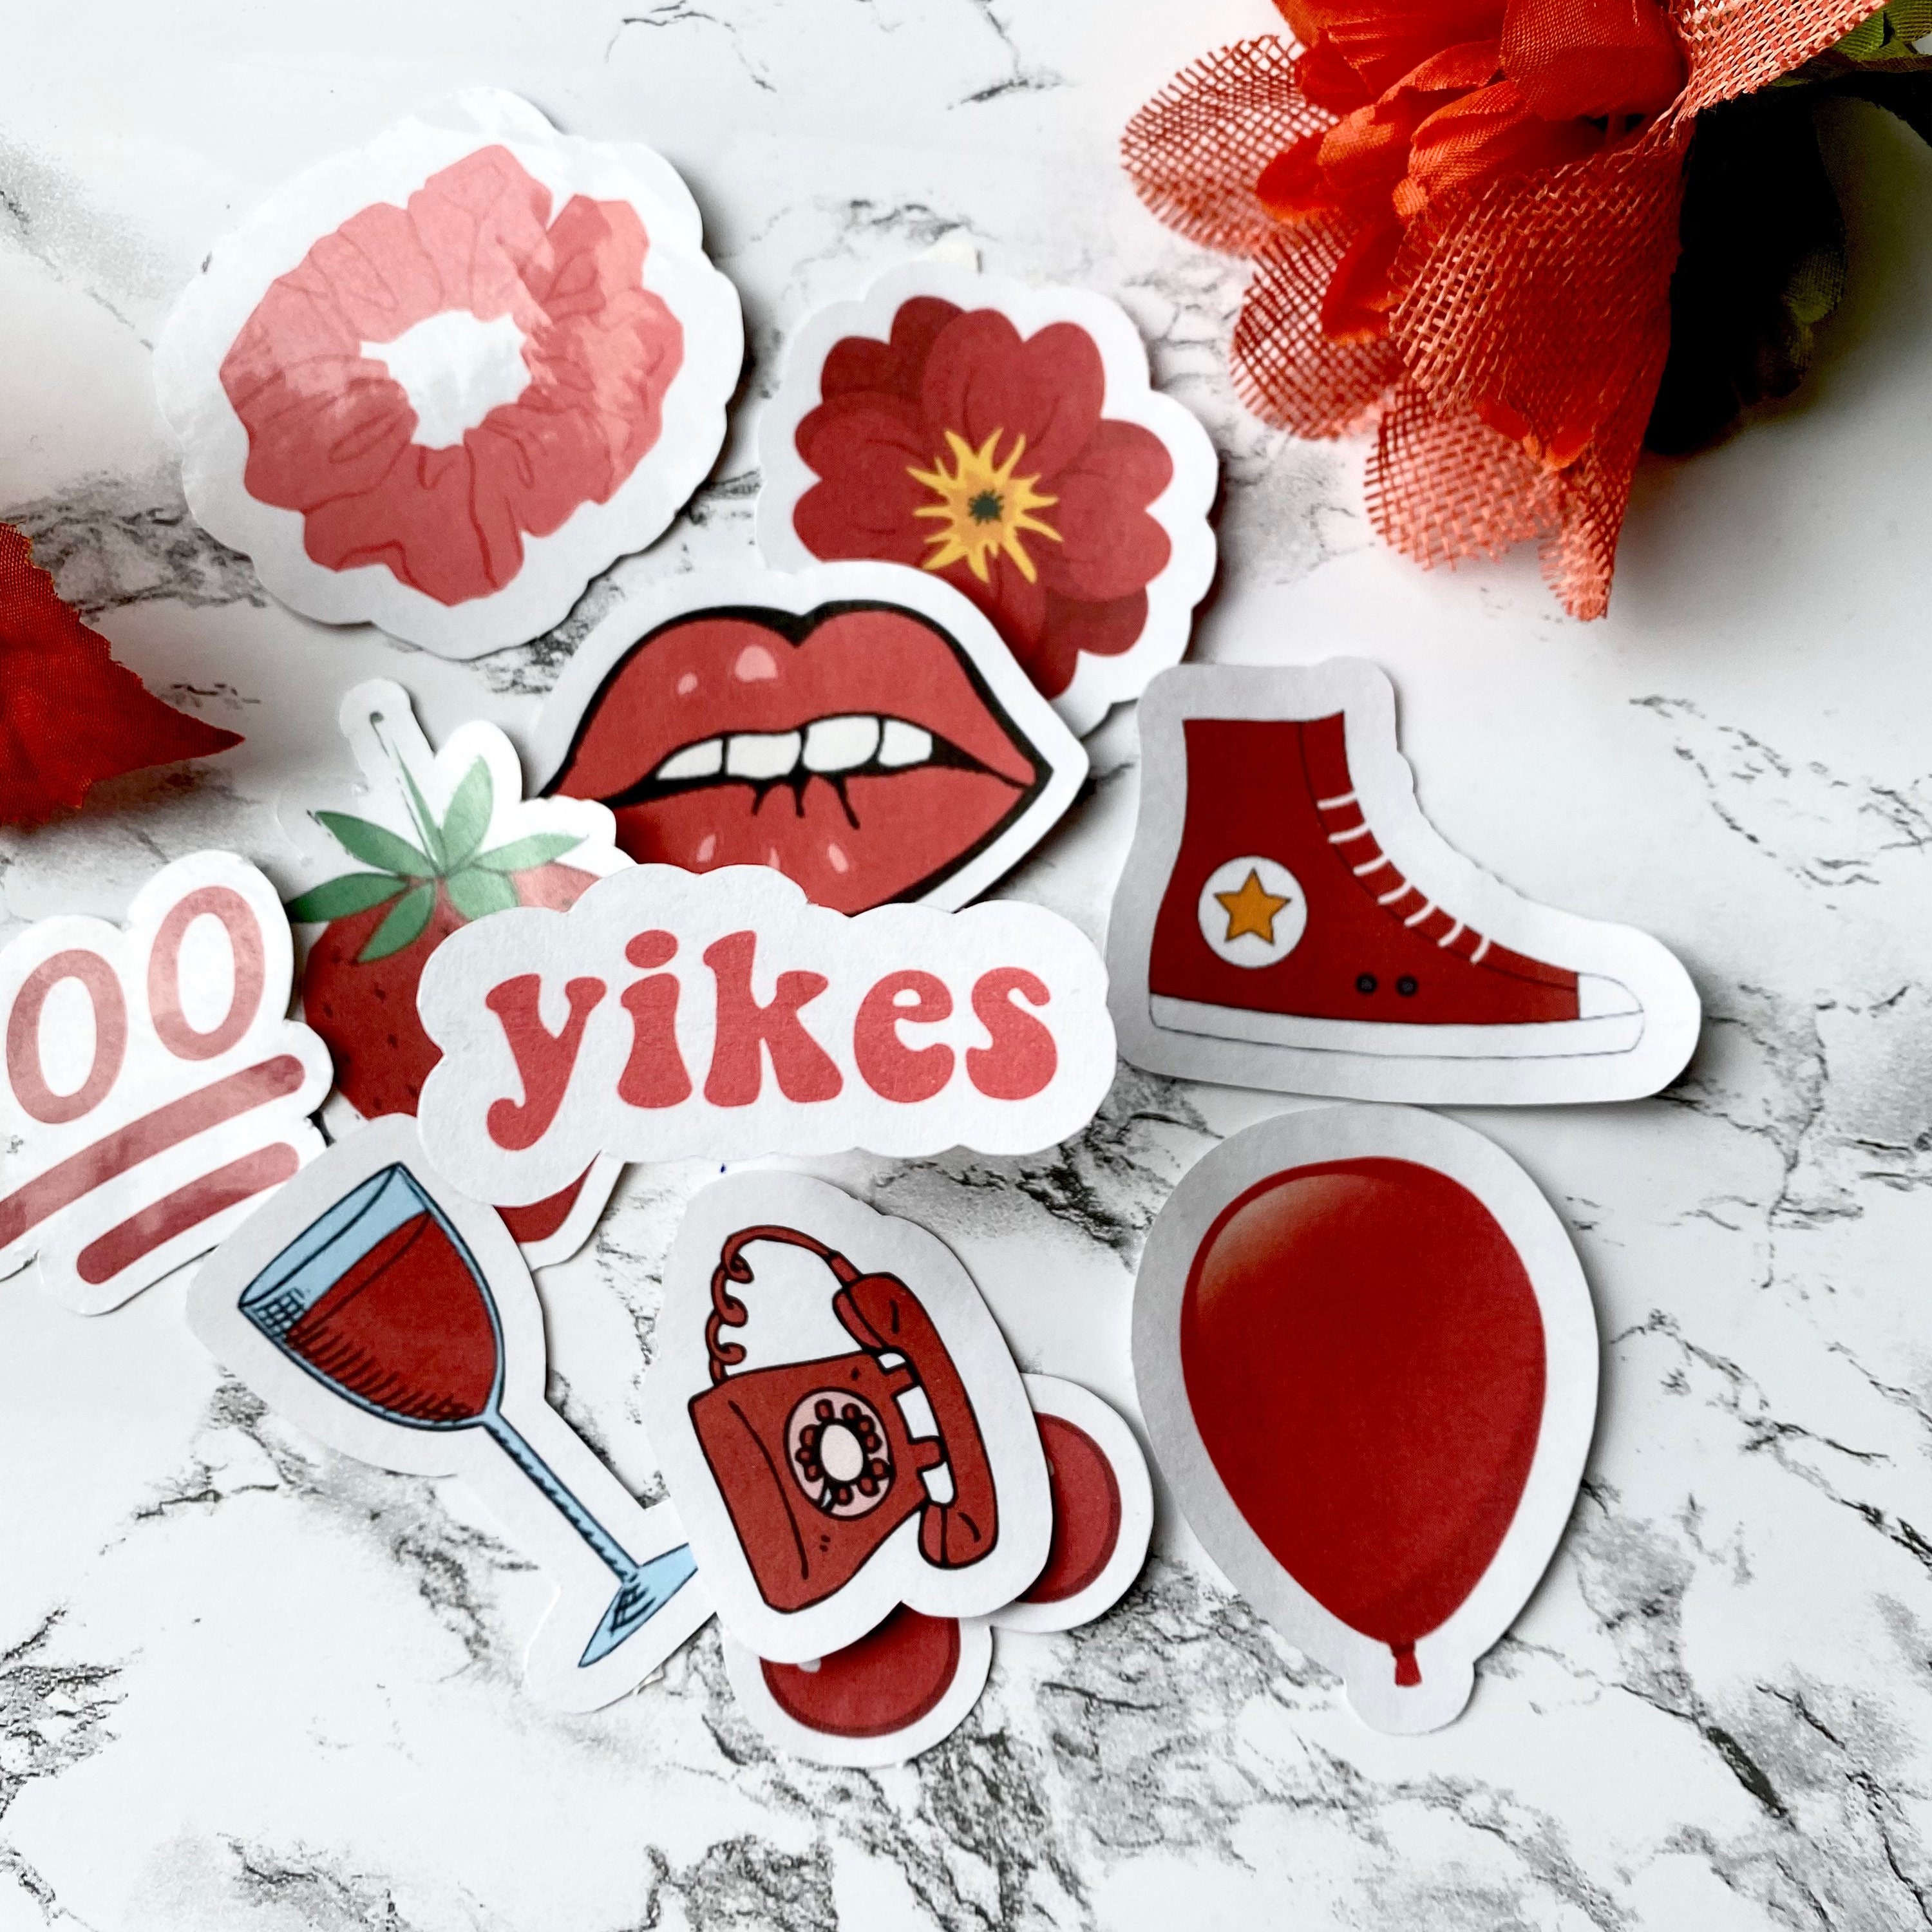 Red Aesthetic Sticker Pack